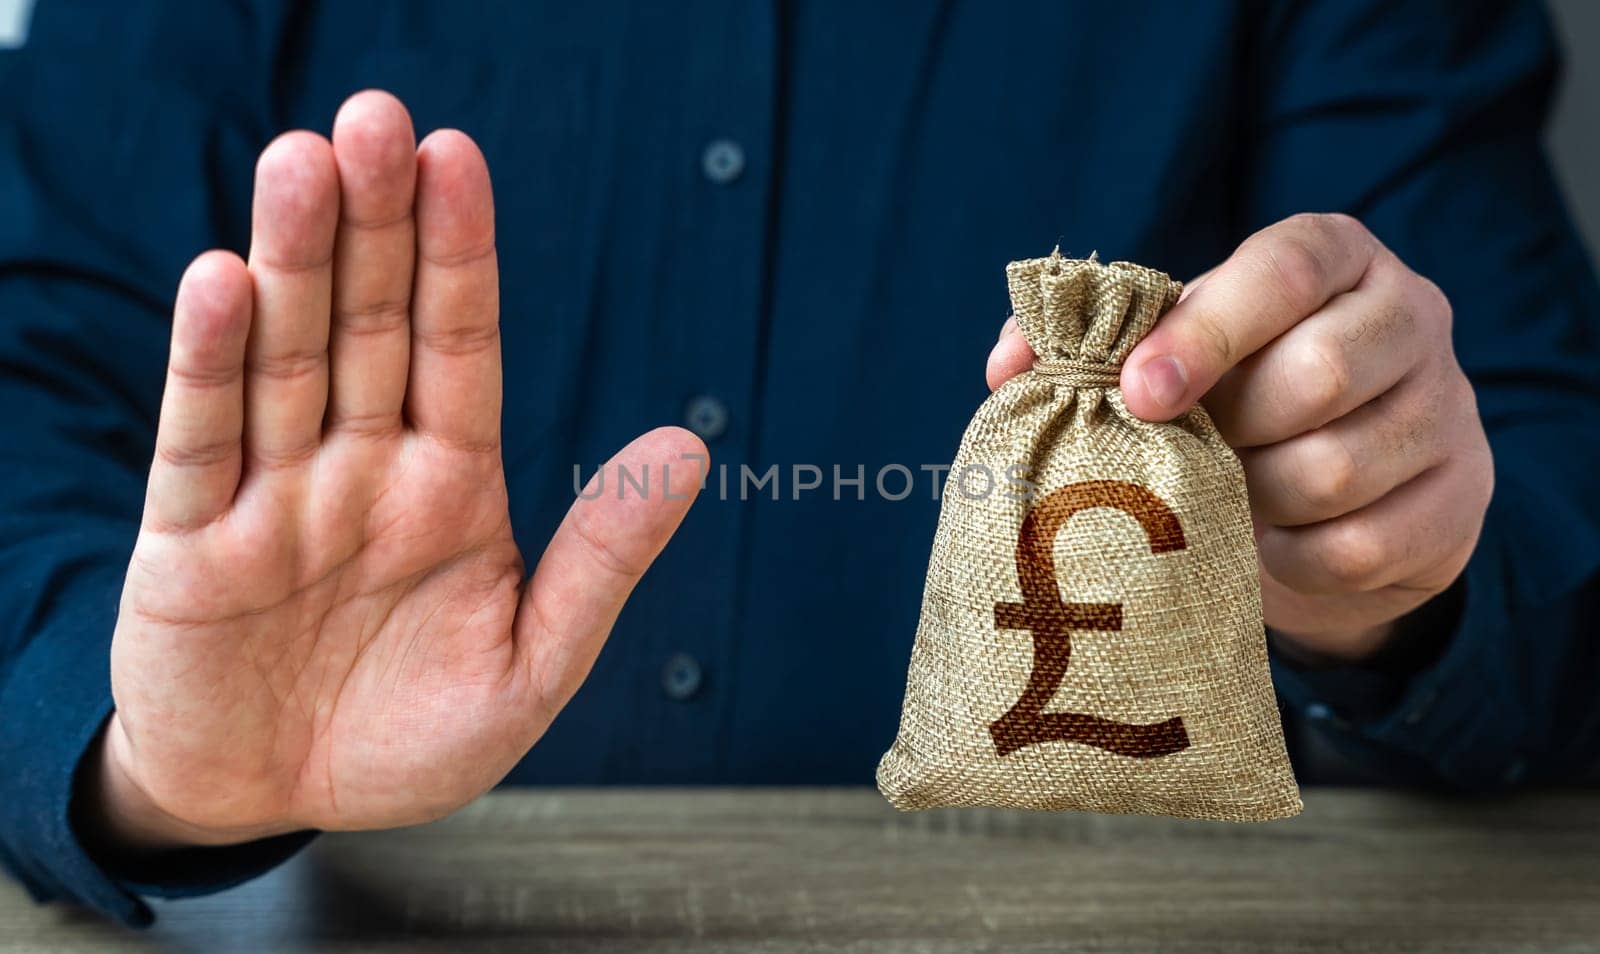 Stop gesture and british pound sterling money bag. Financial difficulties. Asset freeze seizure. Economic sanctions, confiscation of funds. The man does not approve of the transaction or loan.